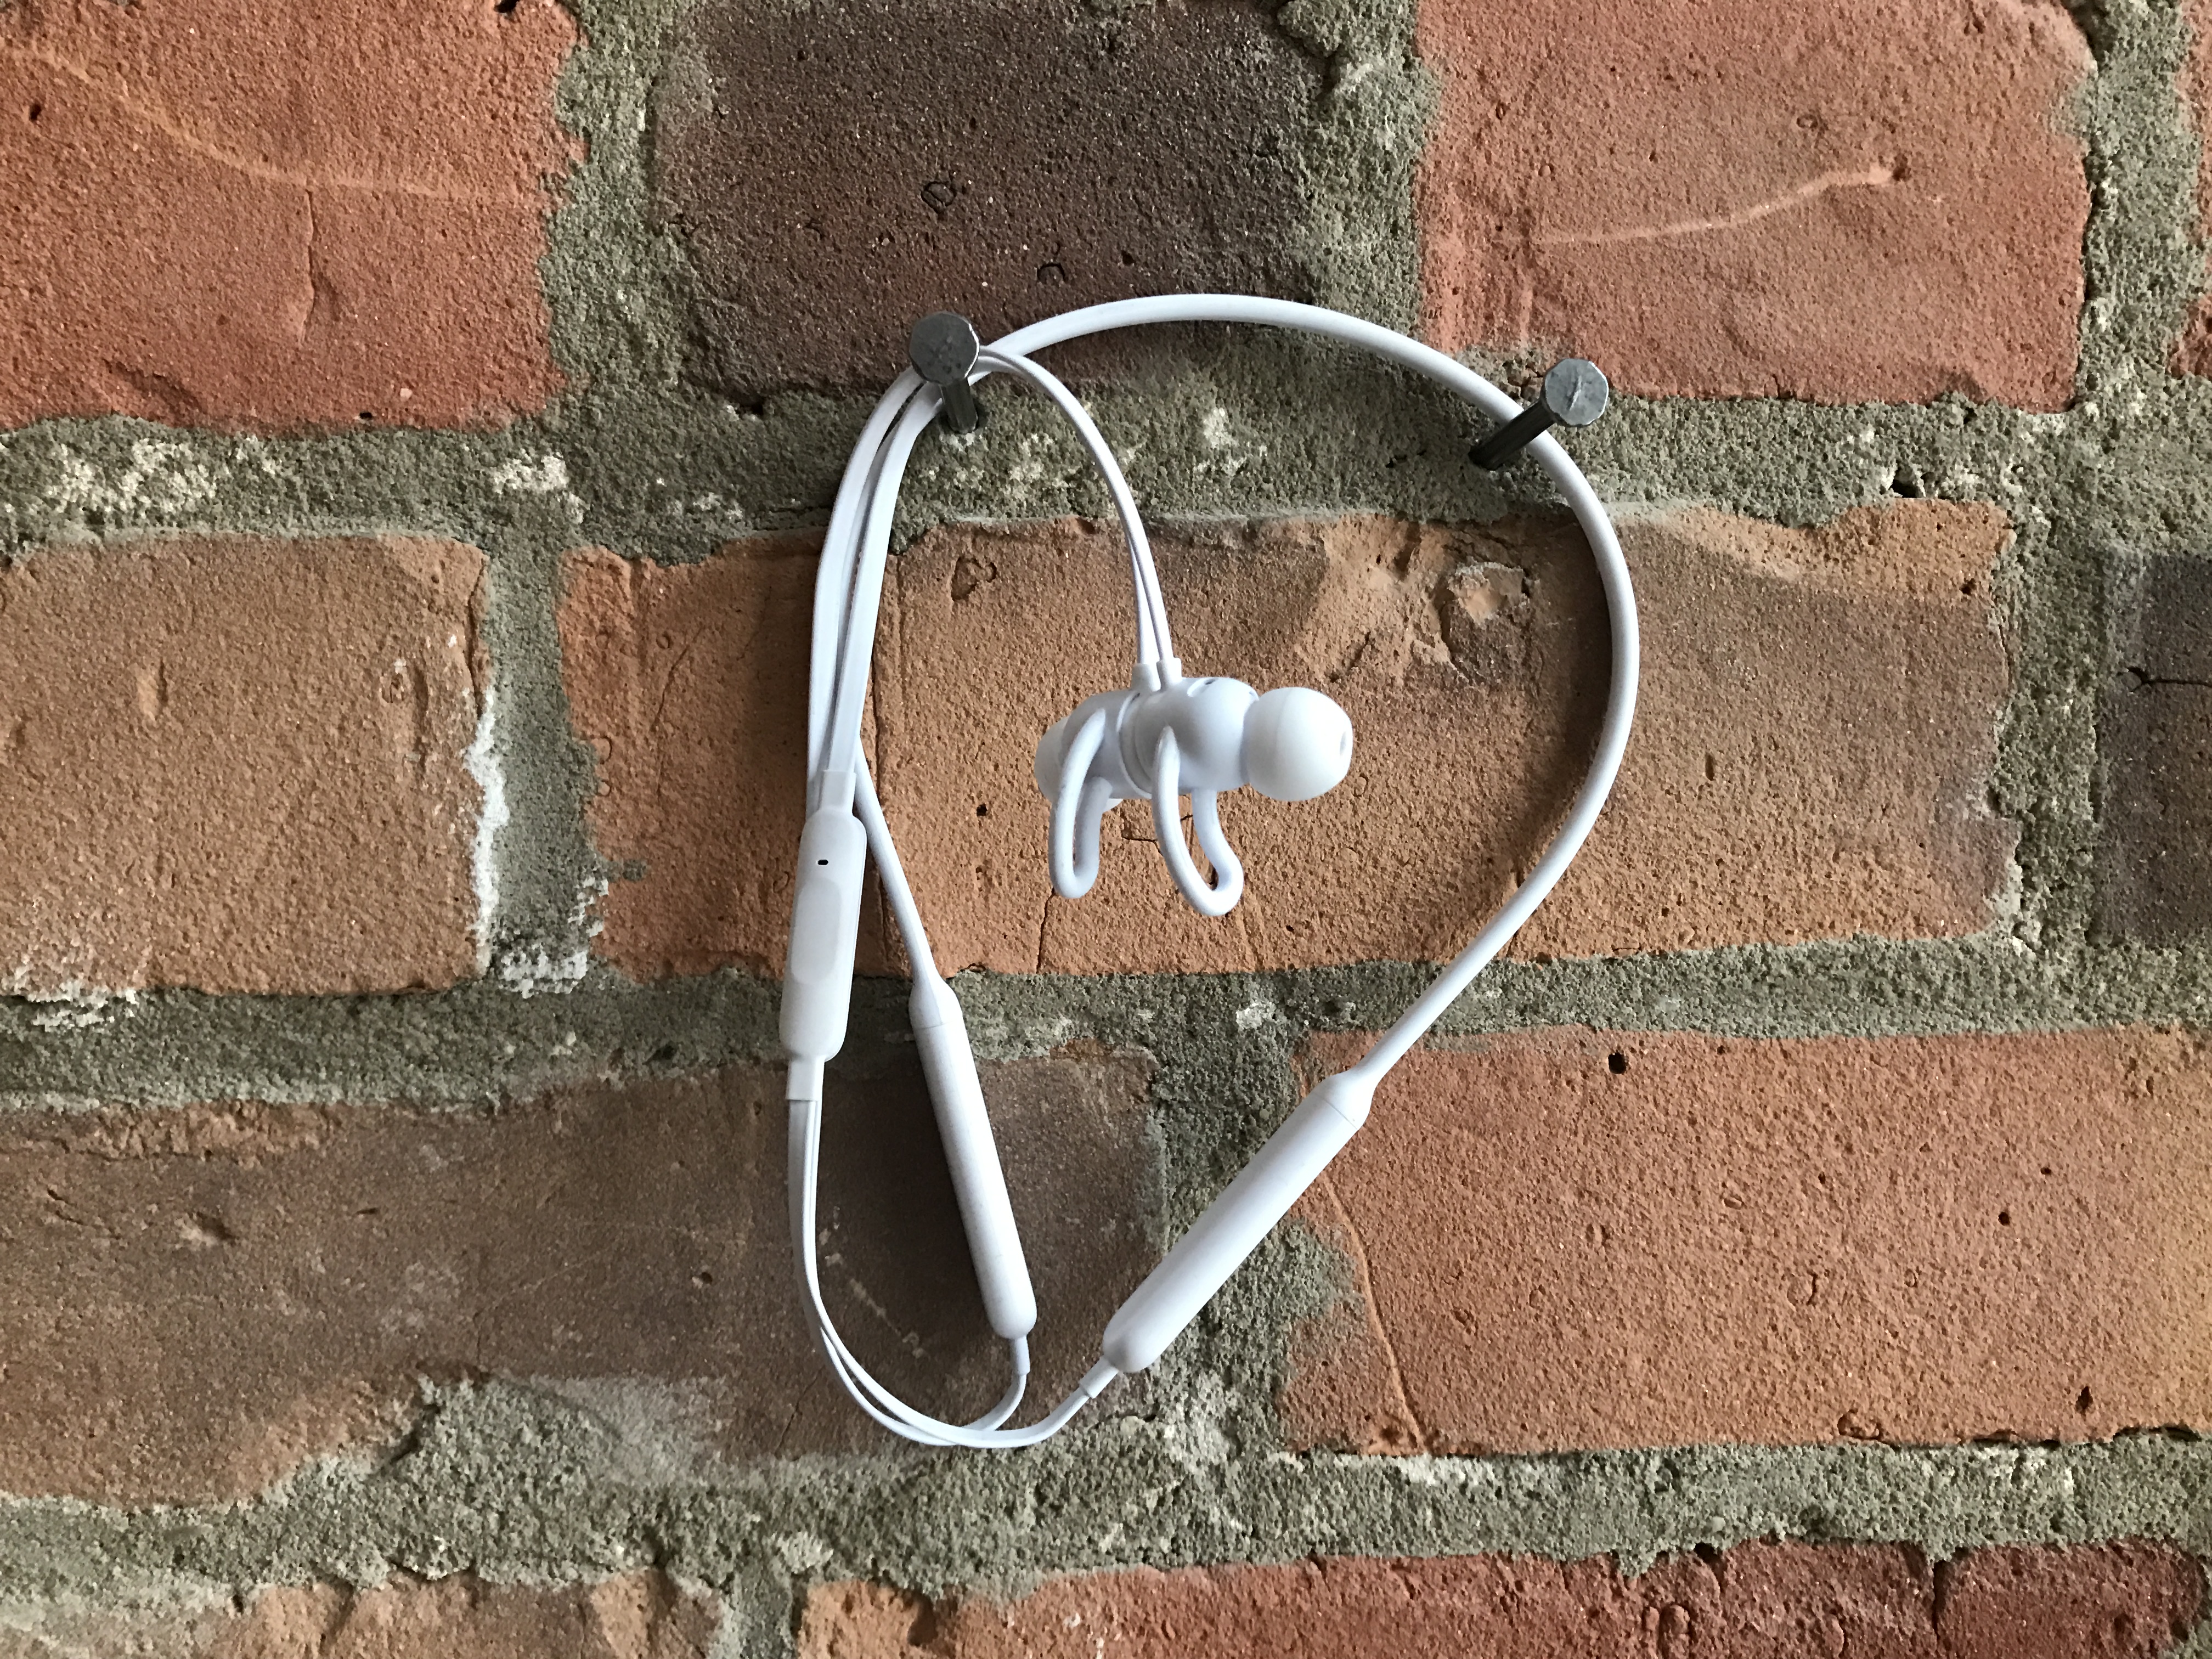 Beats review: Apple made the perfect running headphones BGR